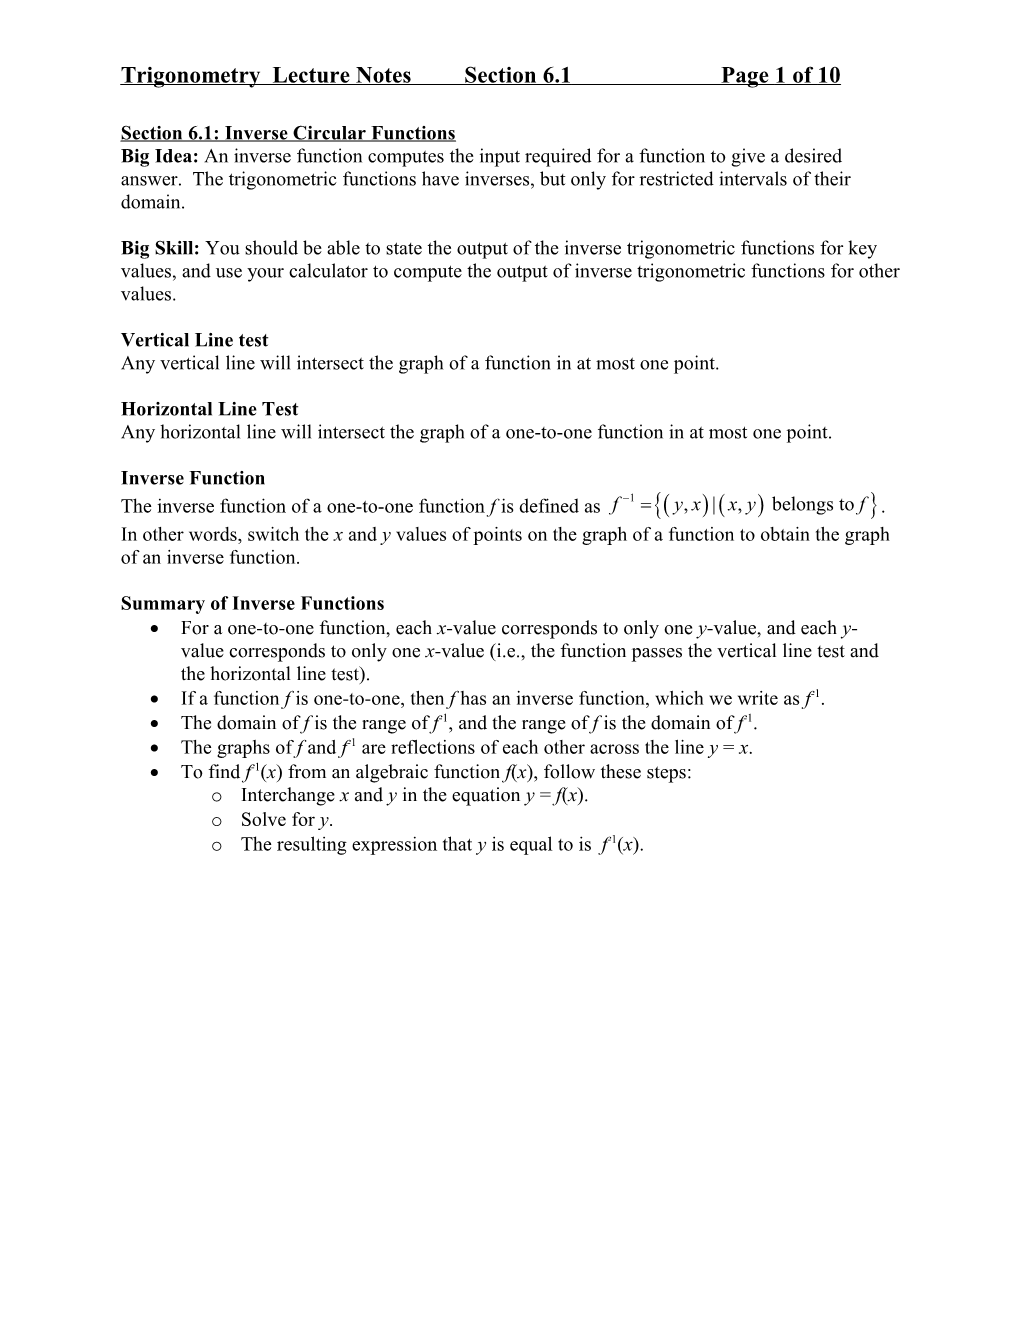 Trigonometry Lecture Notes, Section 6.1